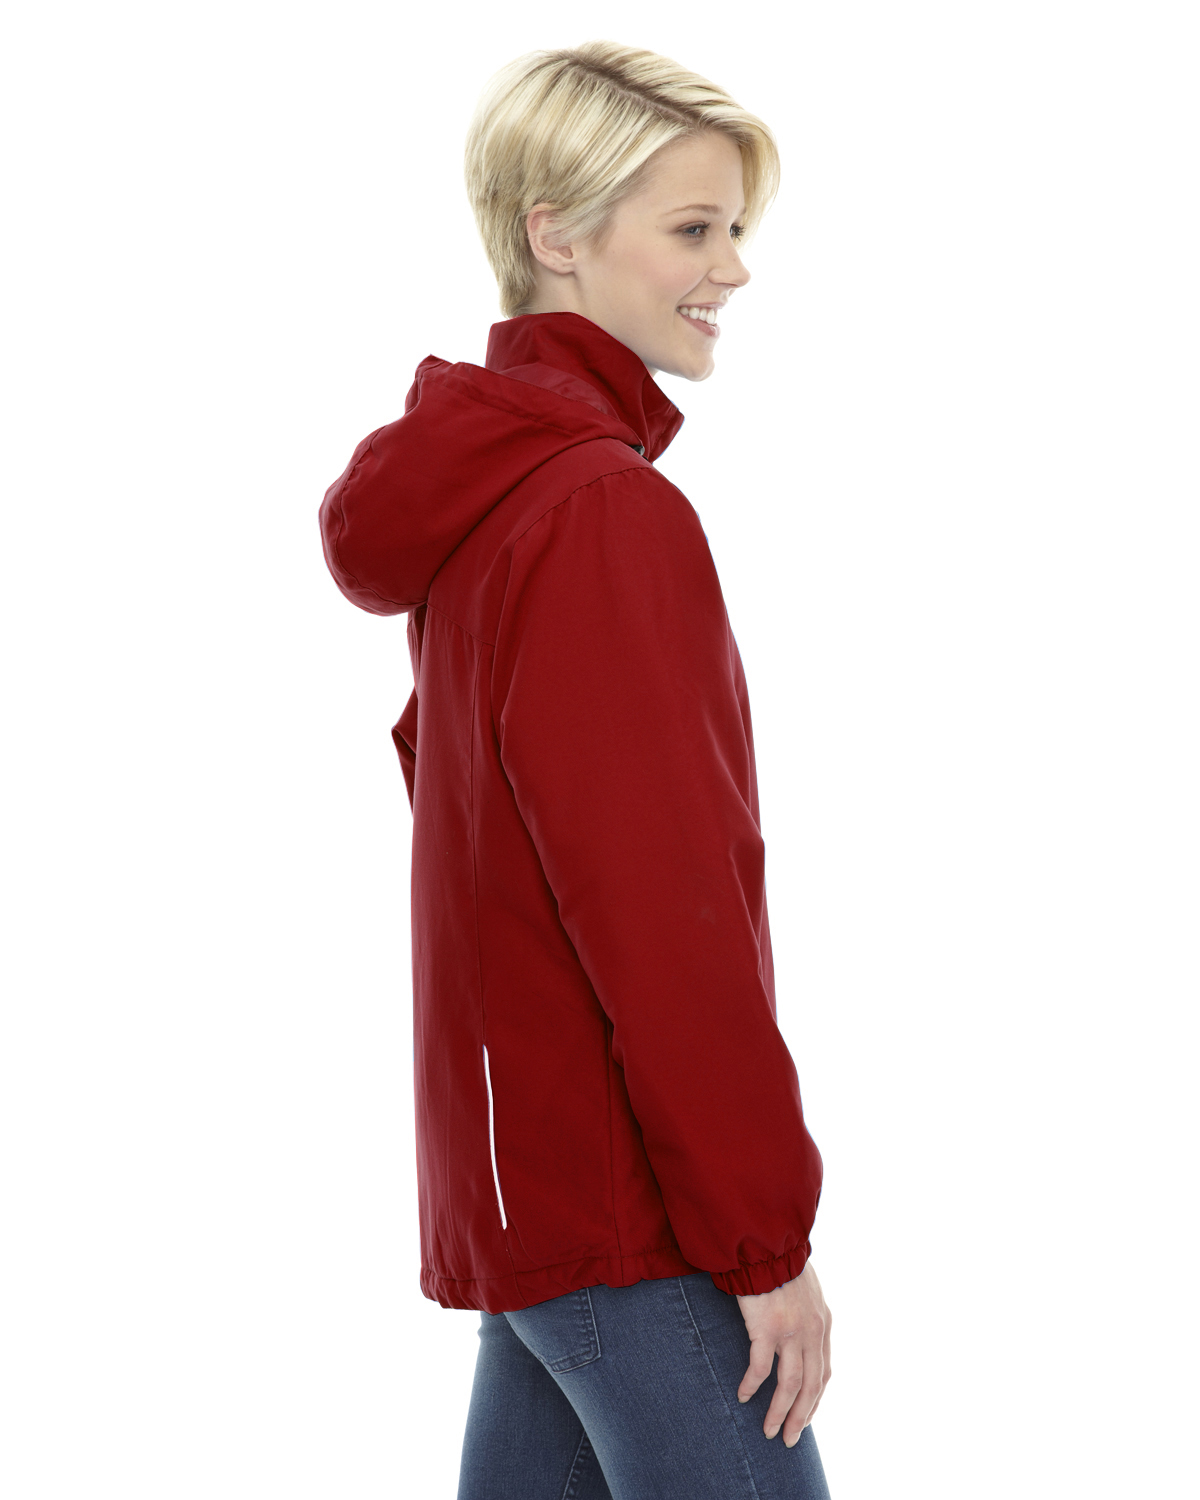 Core 365 78189 Ladies Brisk Insulated Jacket - image 2 of 3